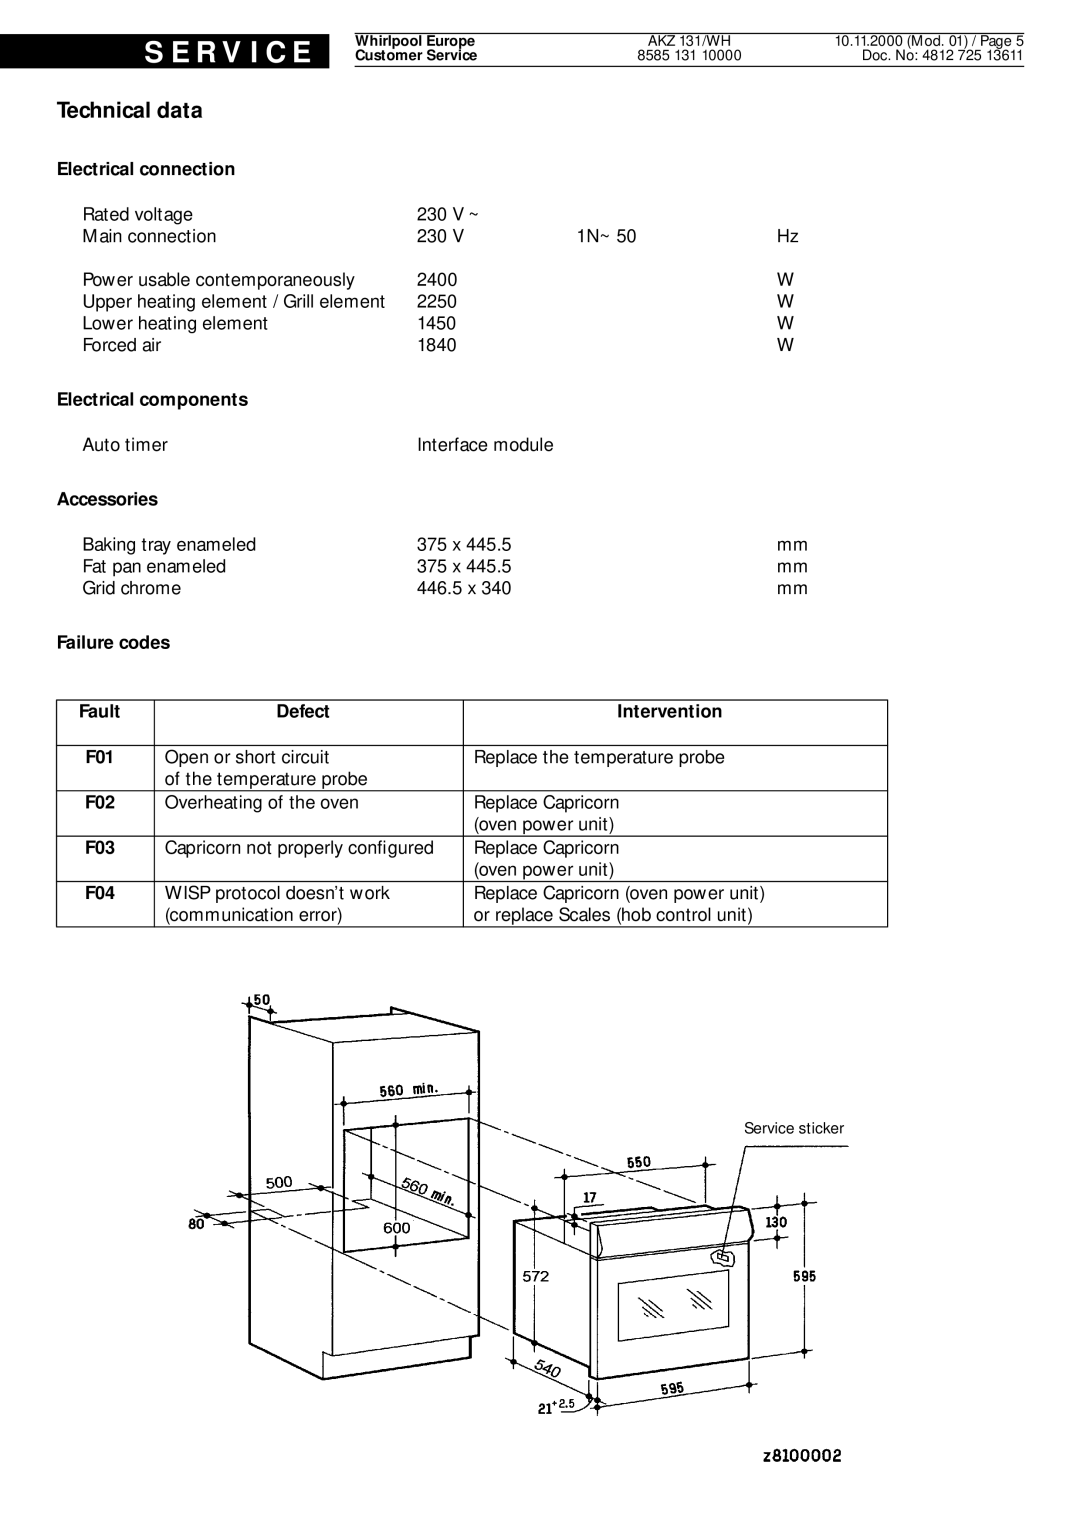 Whirlpool 131, AKZ Technical data, S E R V I C E, Electrical connection, Electrical components, Accessories, Failure codes 